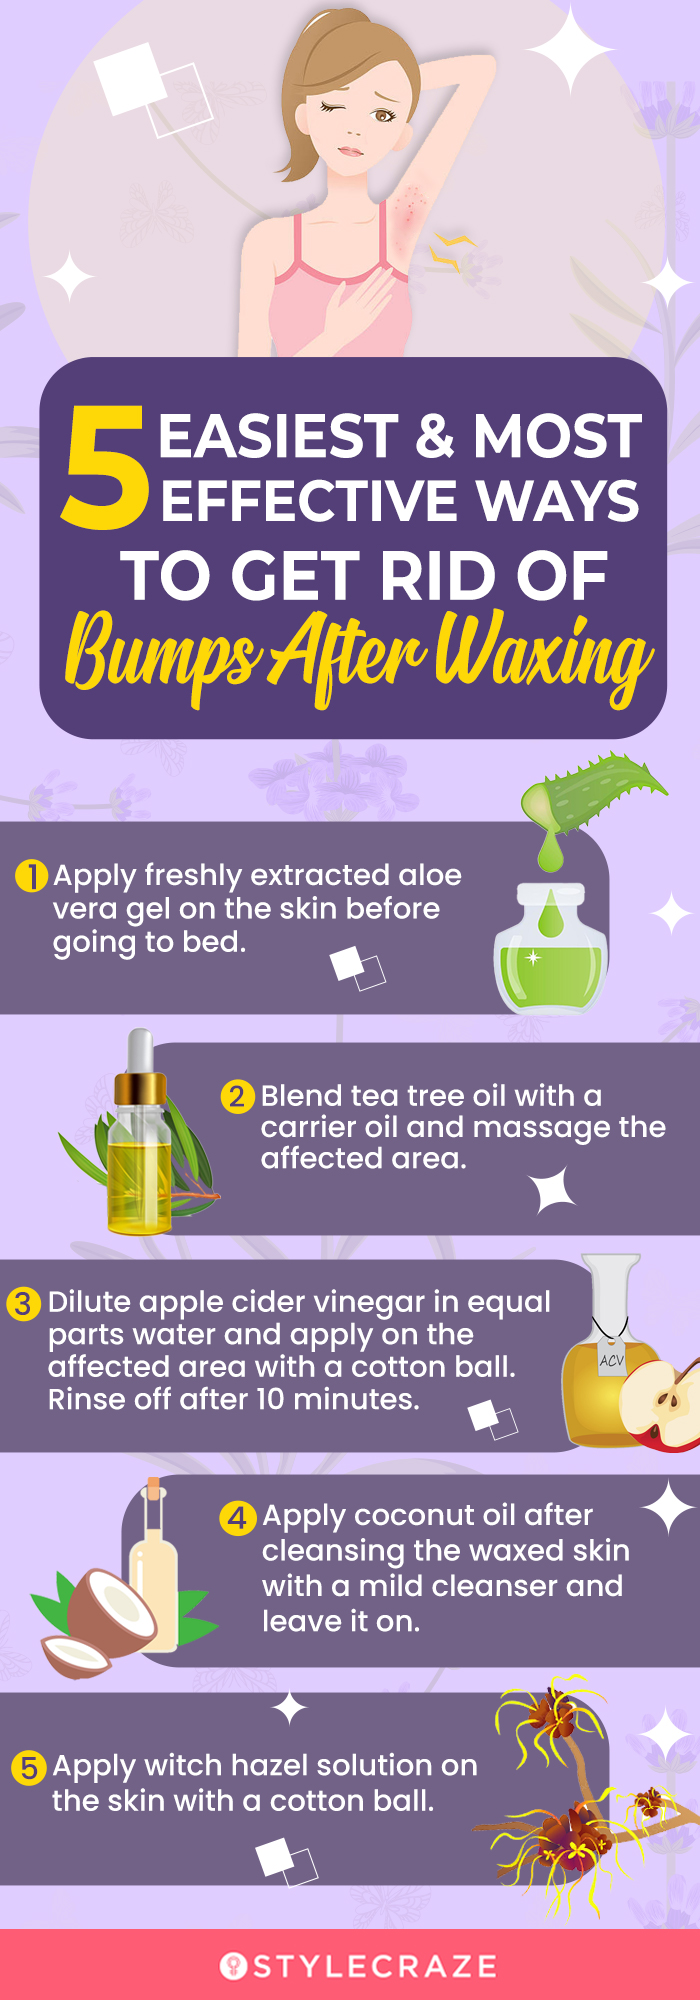 5 easiest & most effective ways to get rid of bumps after waxing (infographic)